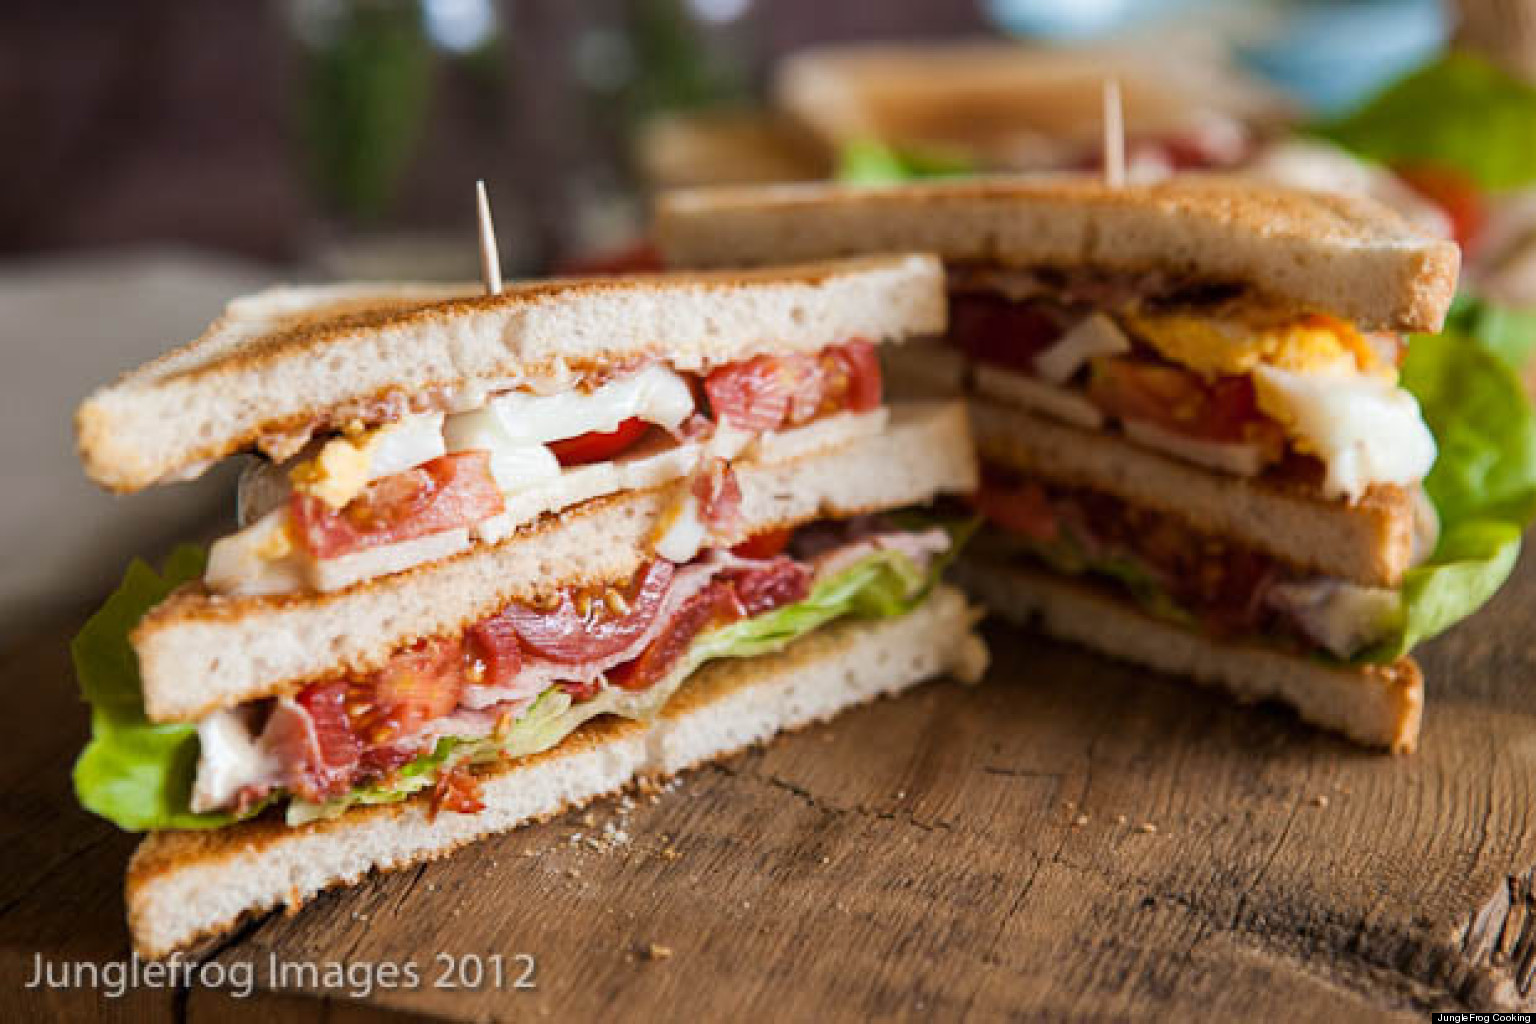 Club Sandwich Recipes Turkey Is Amazing But We Want More Variety Photos Huffpost